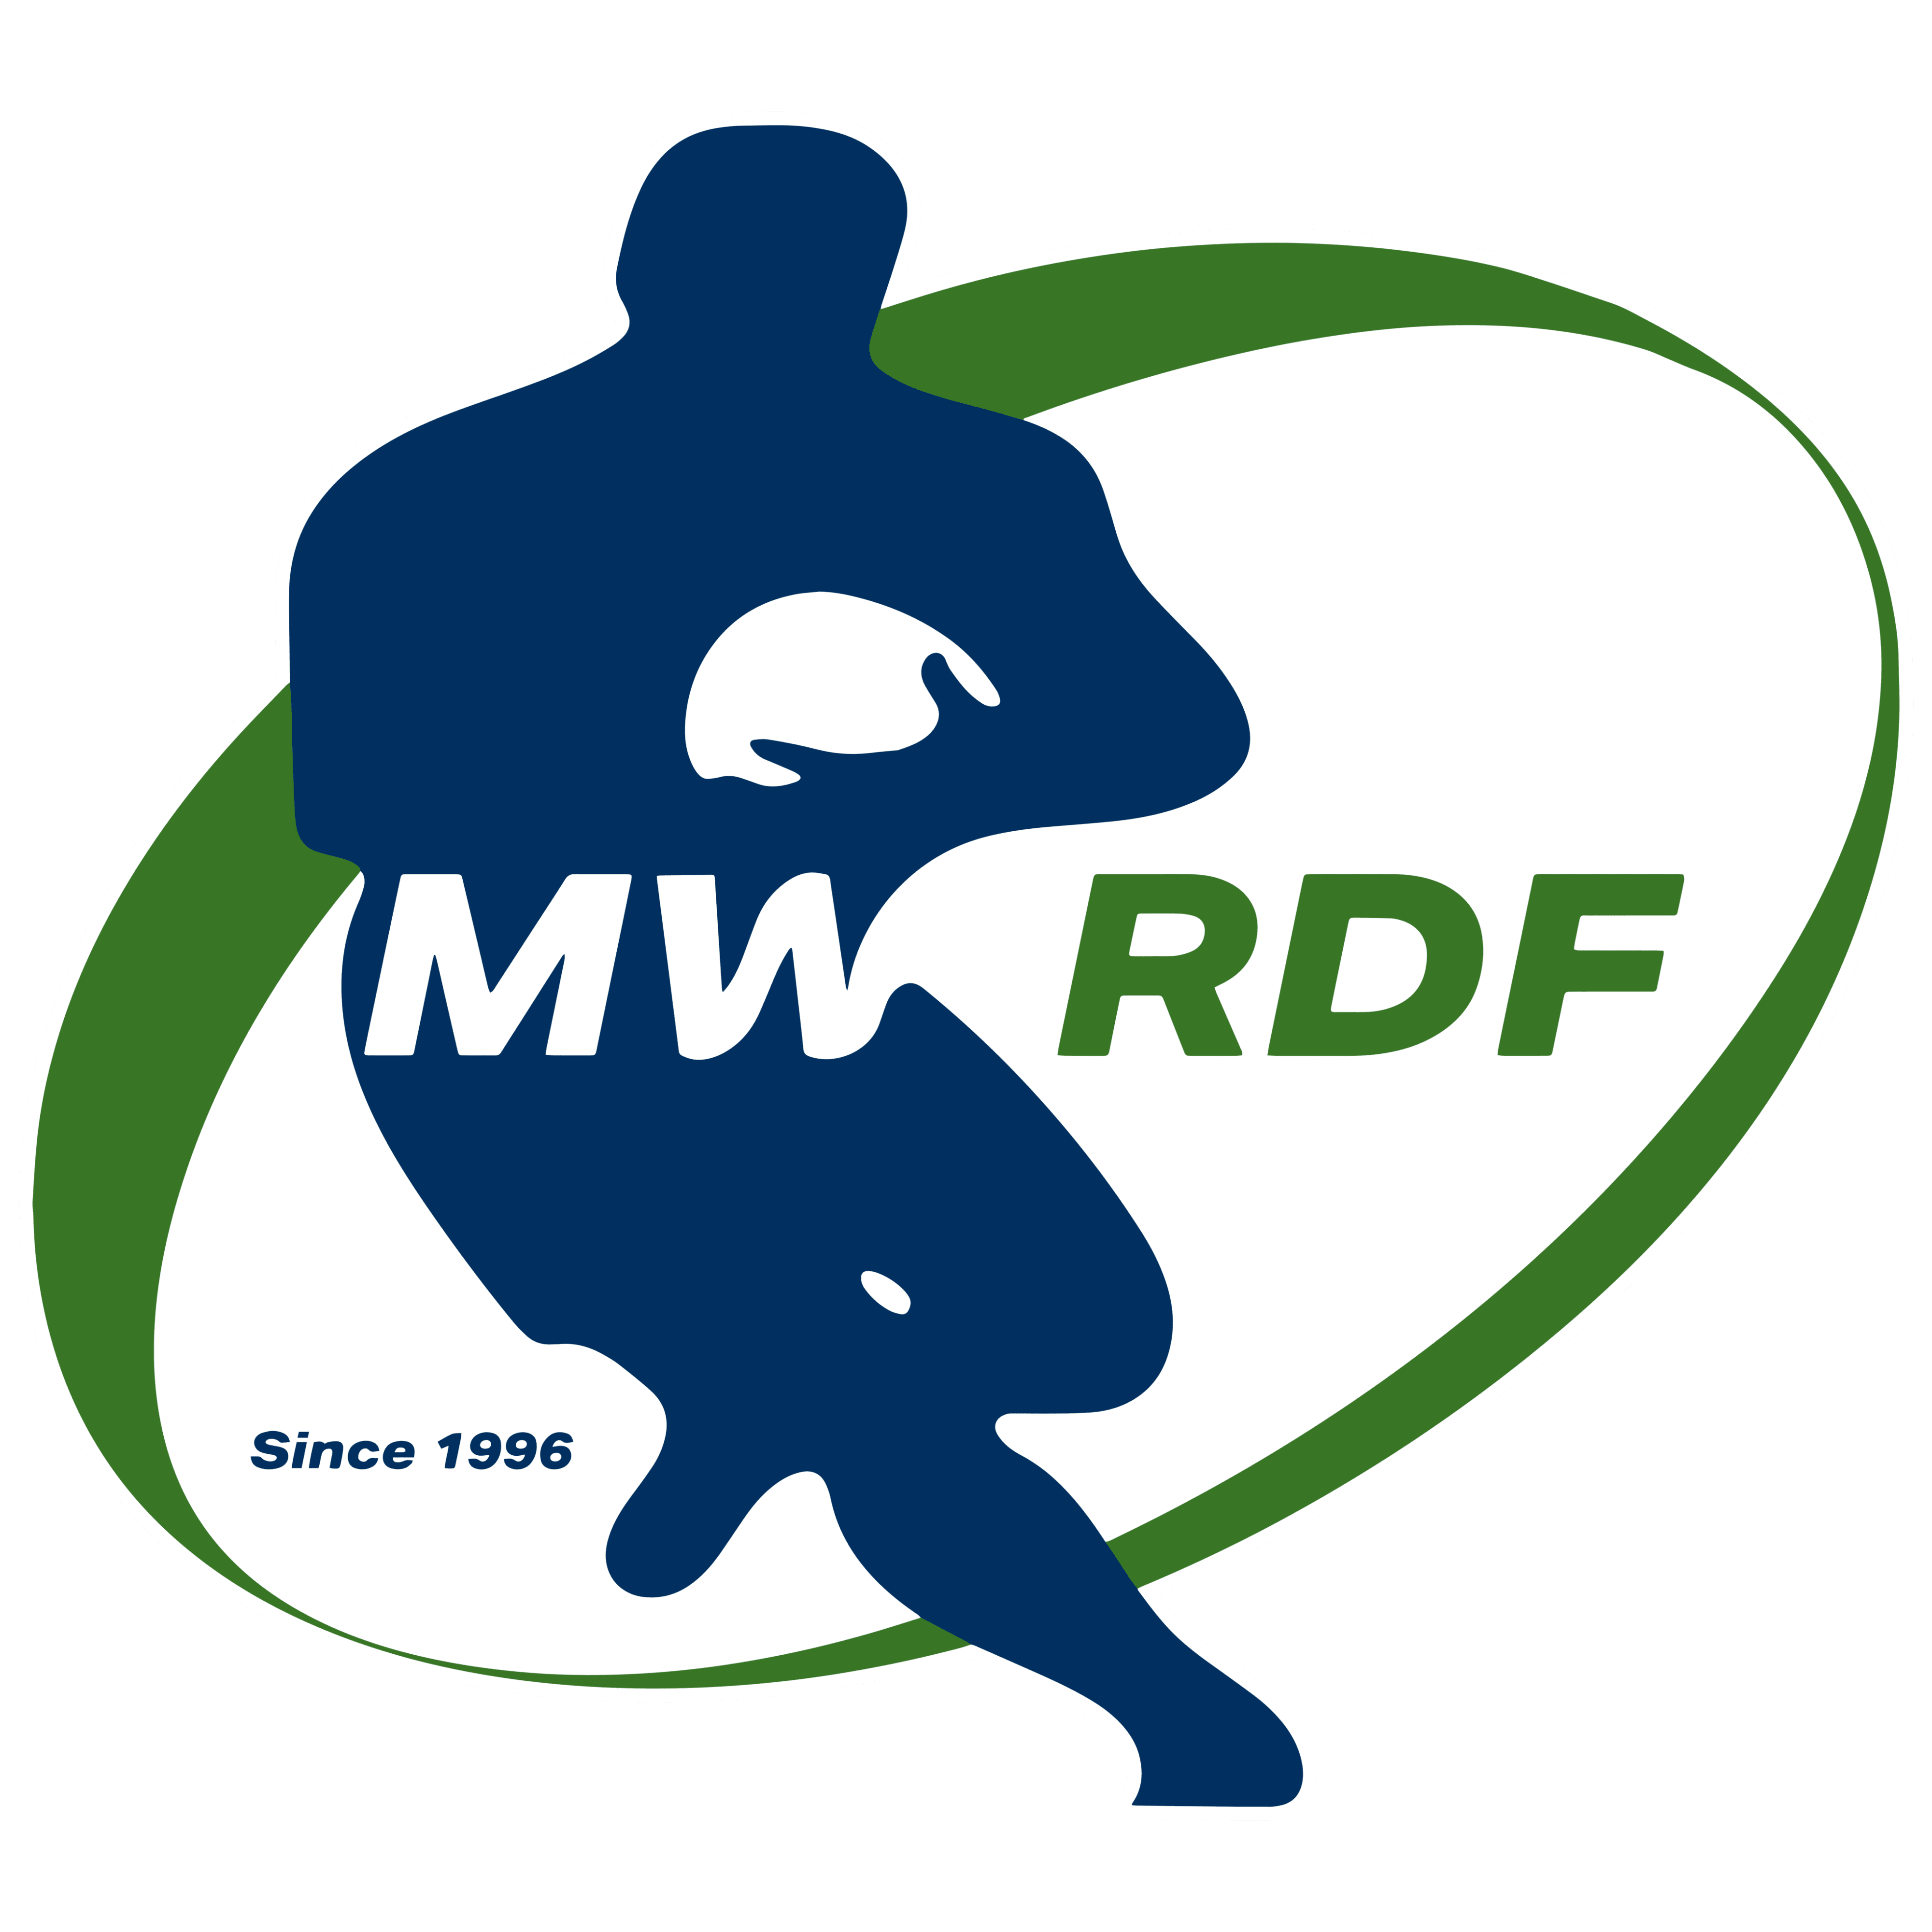 Midwest Rugby Development Foundation